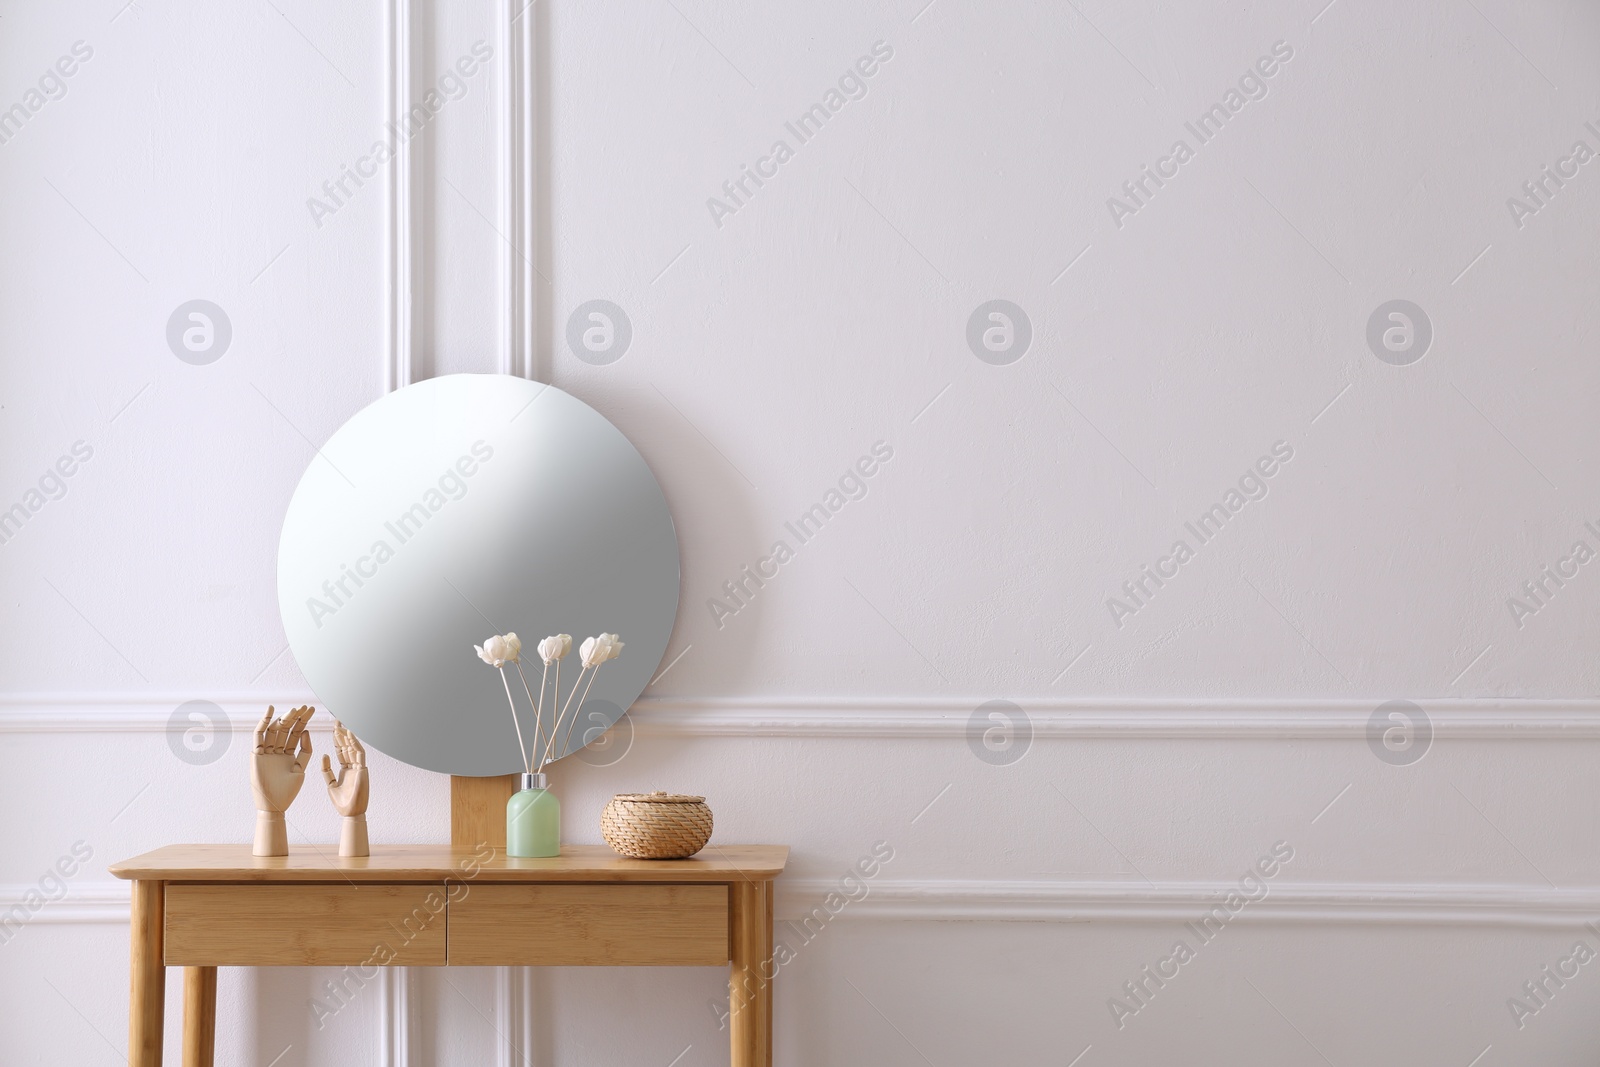 Photo of Air reed freshener and decor on console table near white wall with mirror indoors, space for text. Interior design